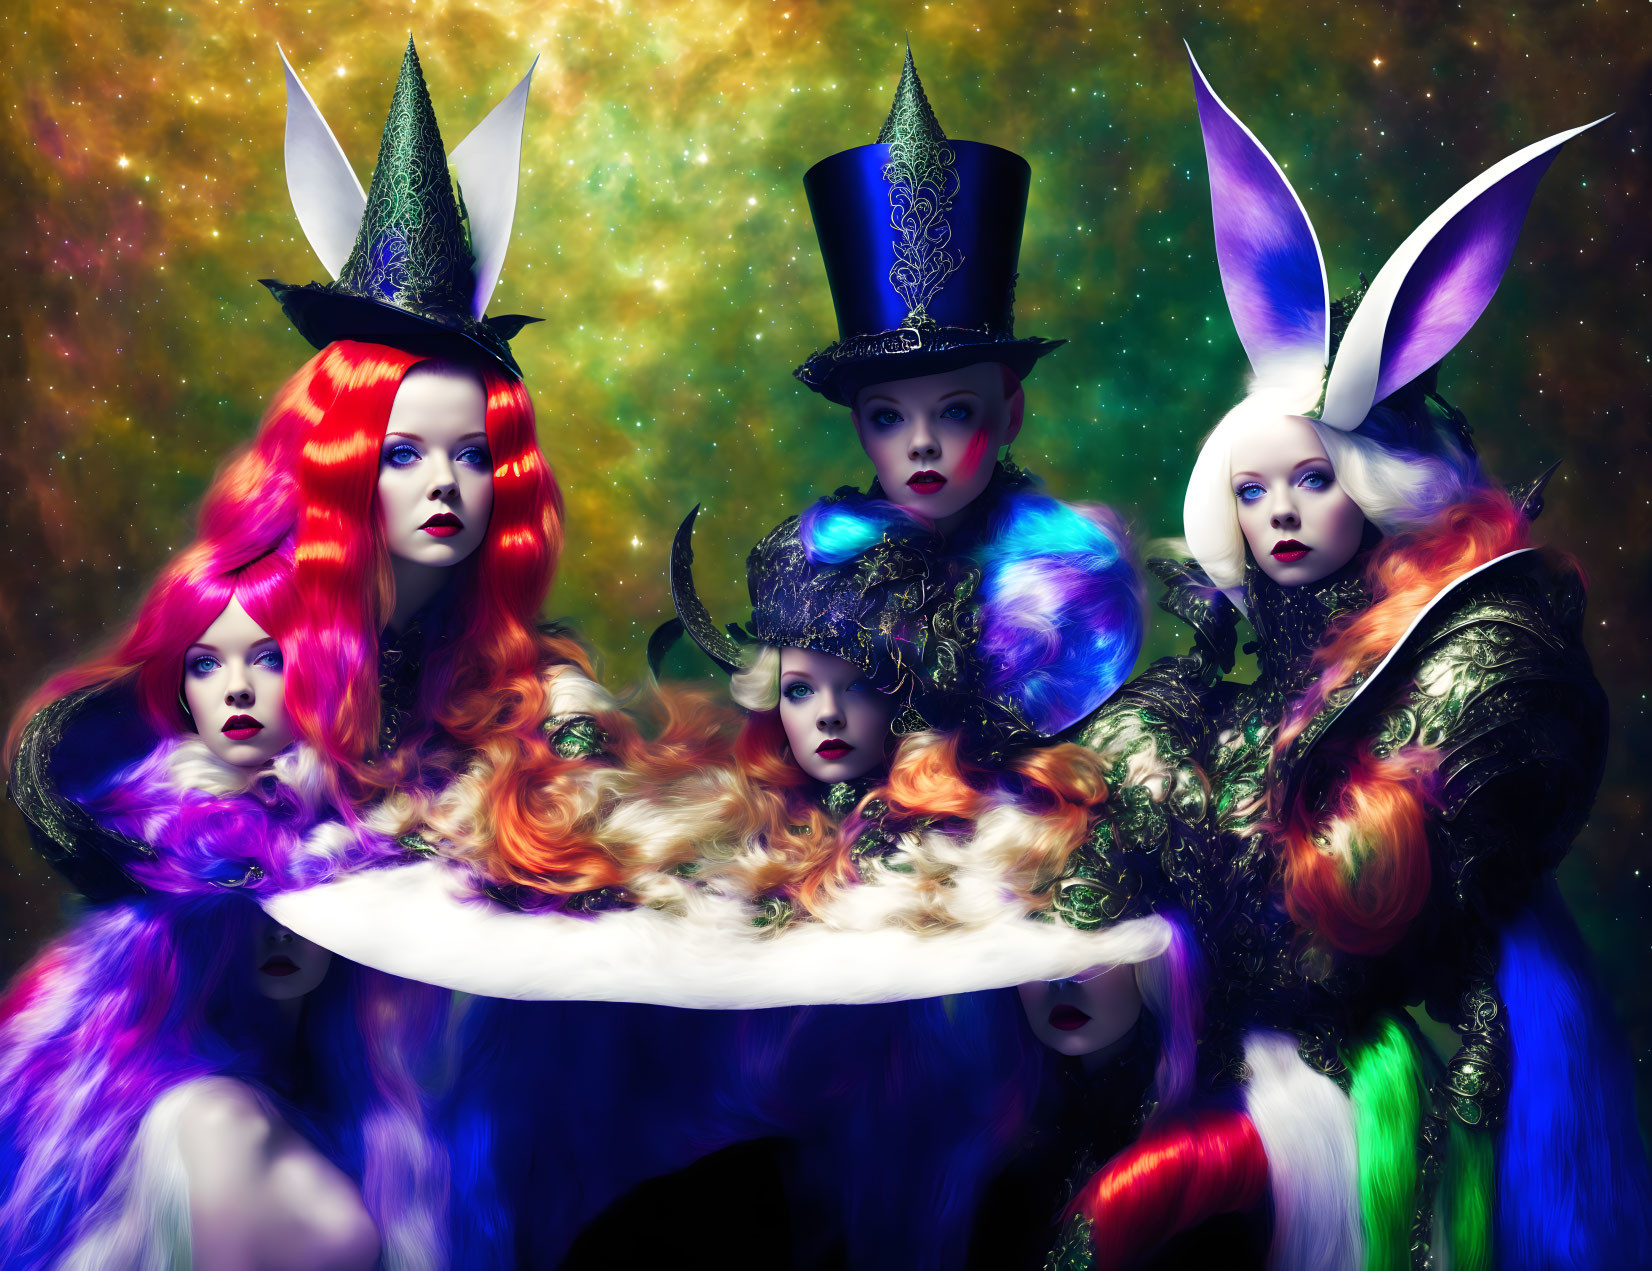 Five Women in Elaborate Costumes with Vivid Hair and Whimsical Hats against Cosmic Back